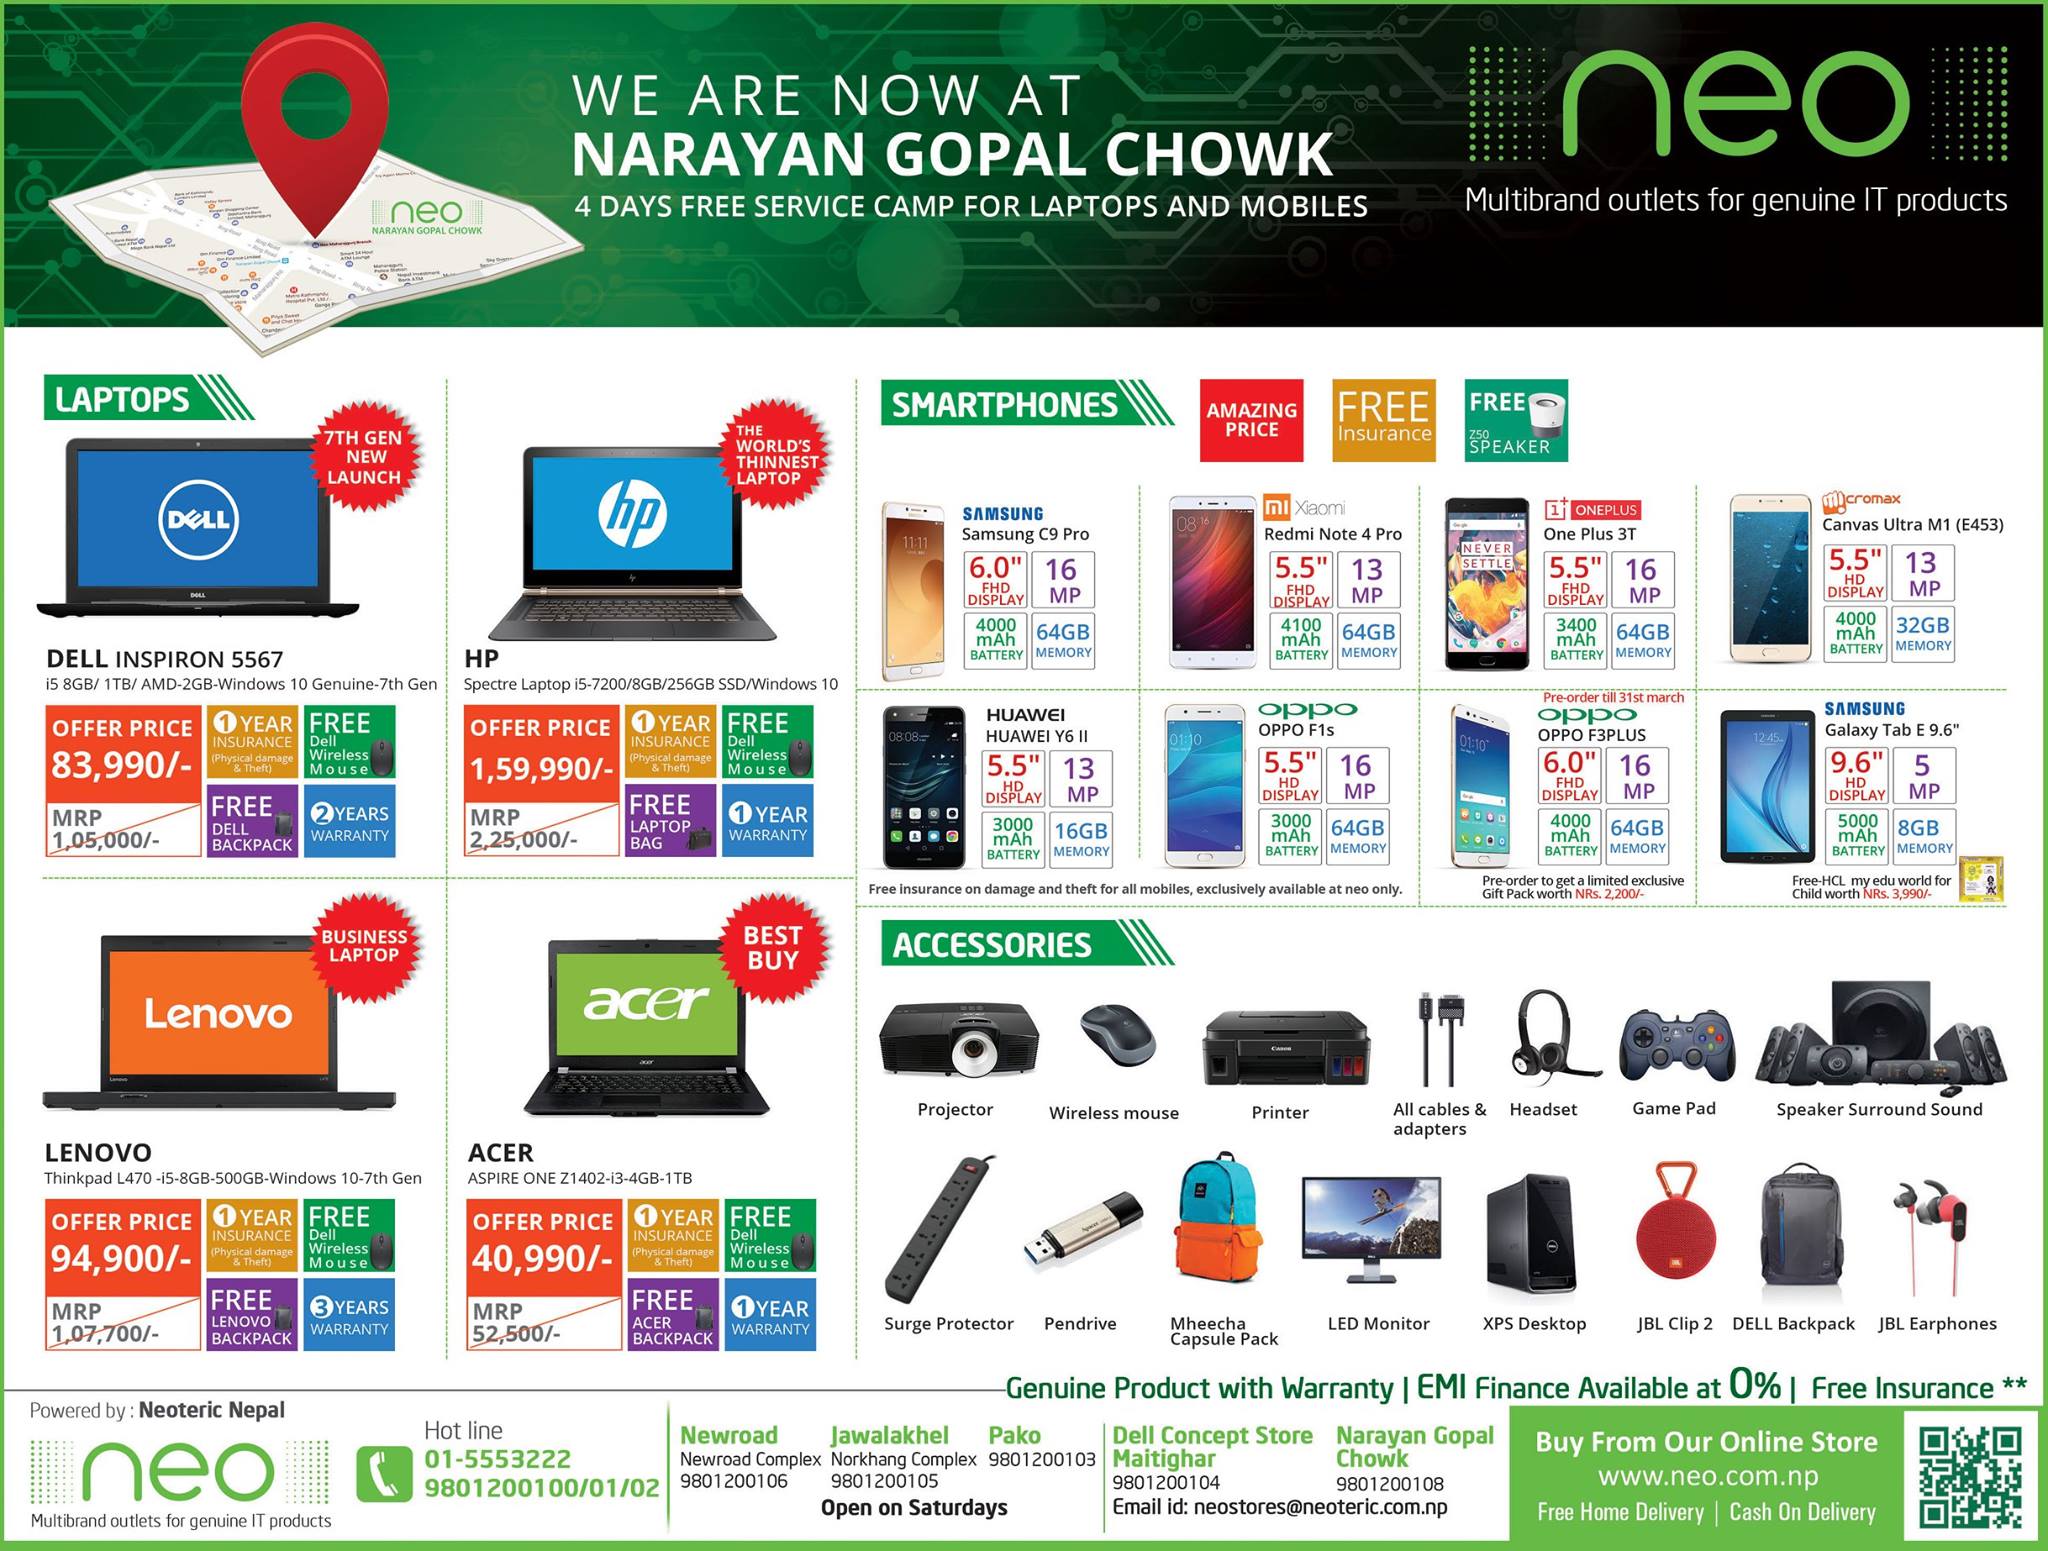 Neo Brings Special Offers On Mobiles and Laptops: Is It Any Special?